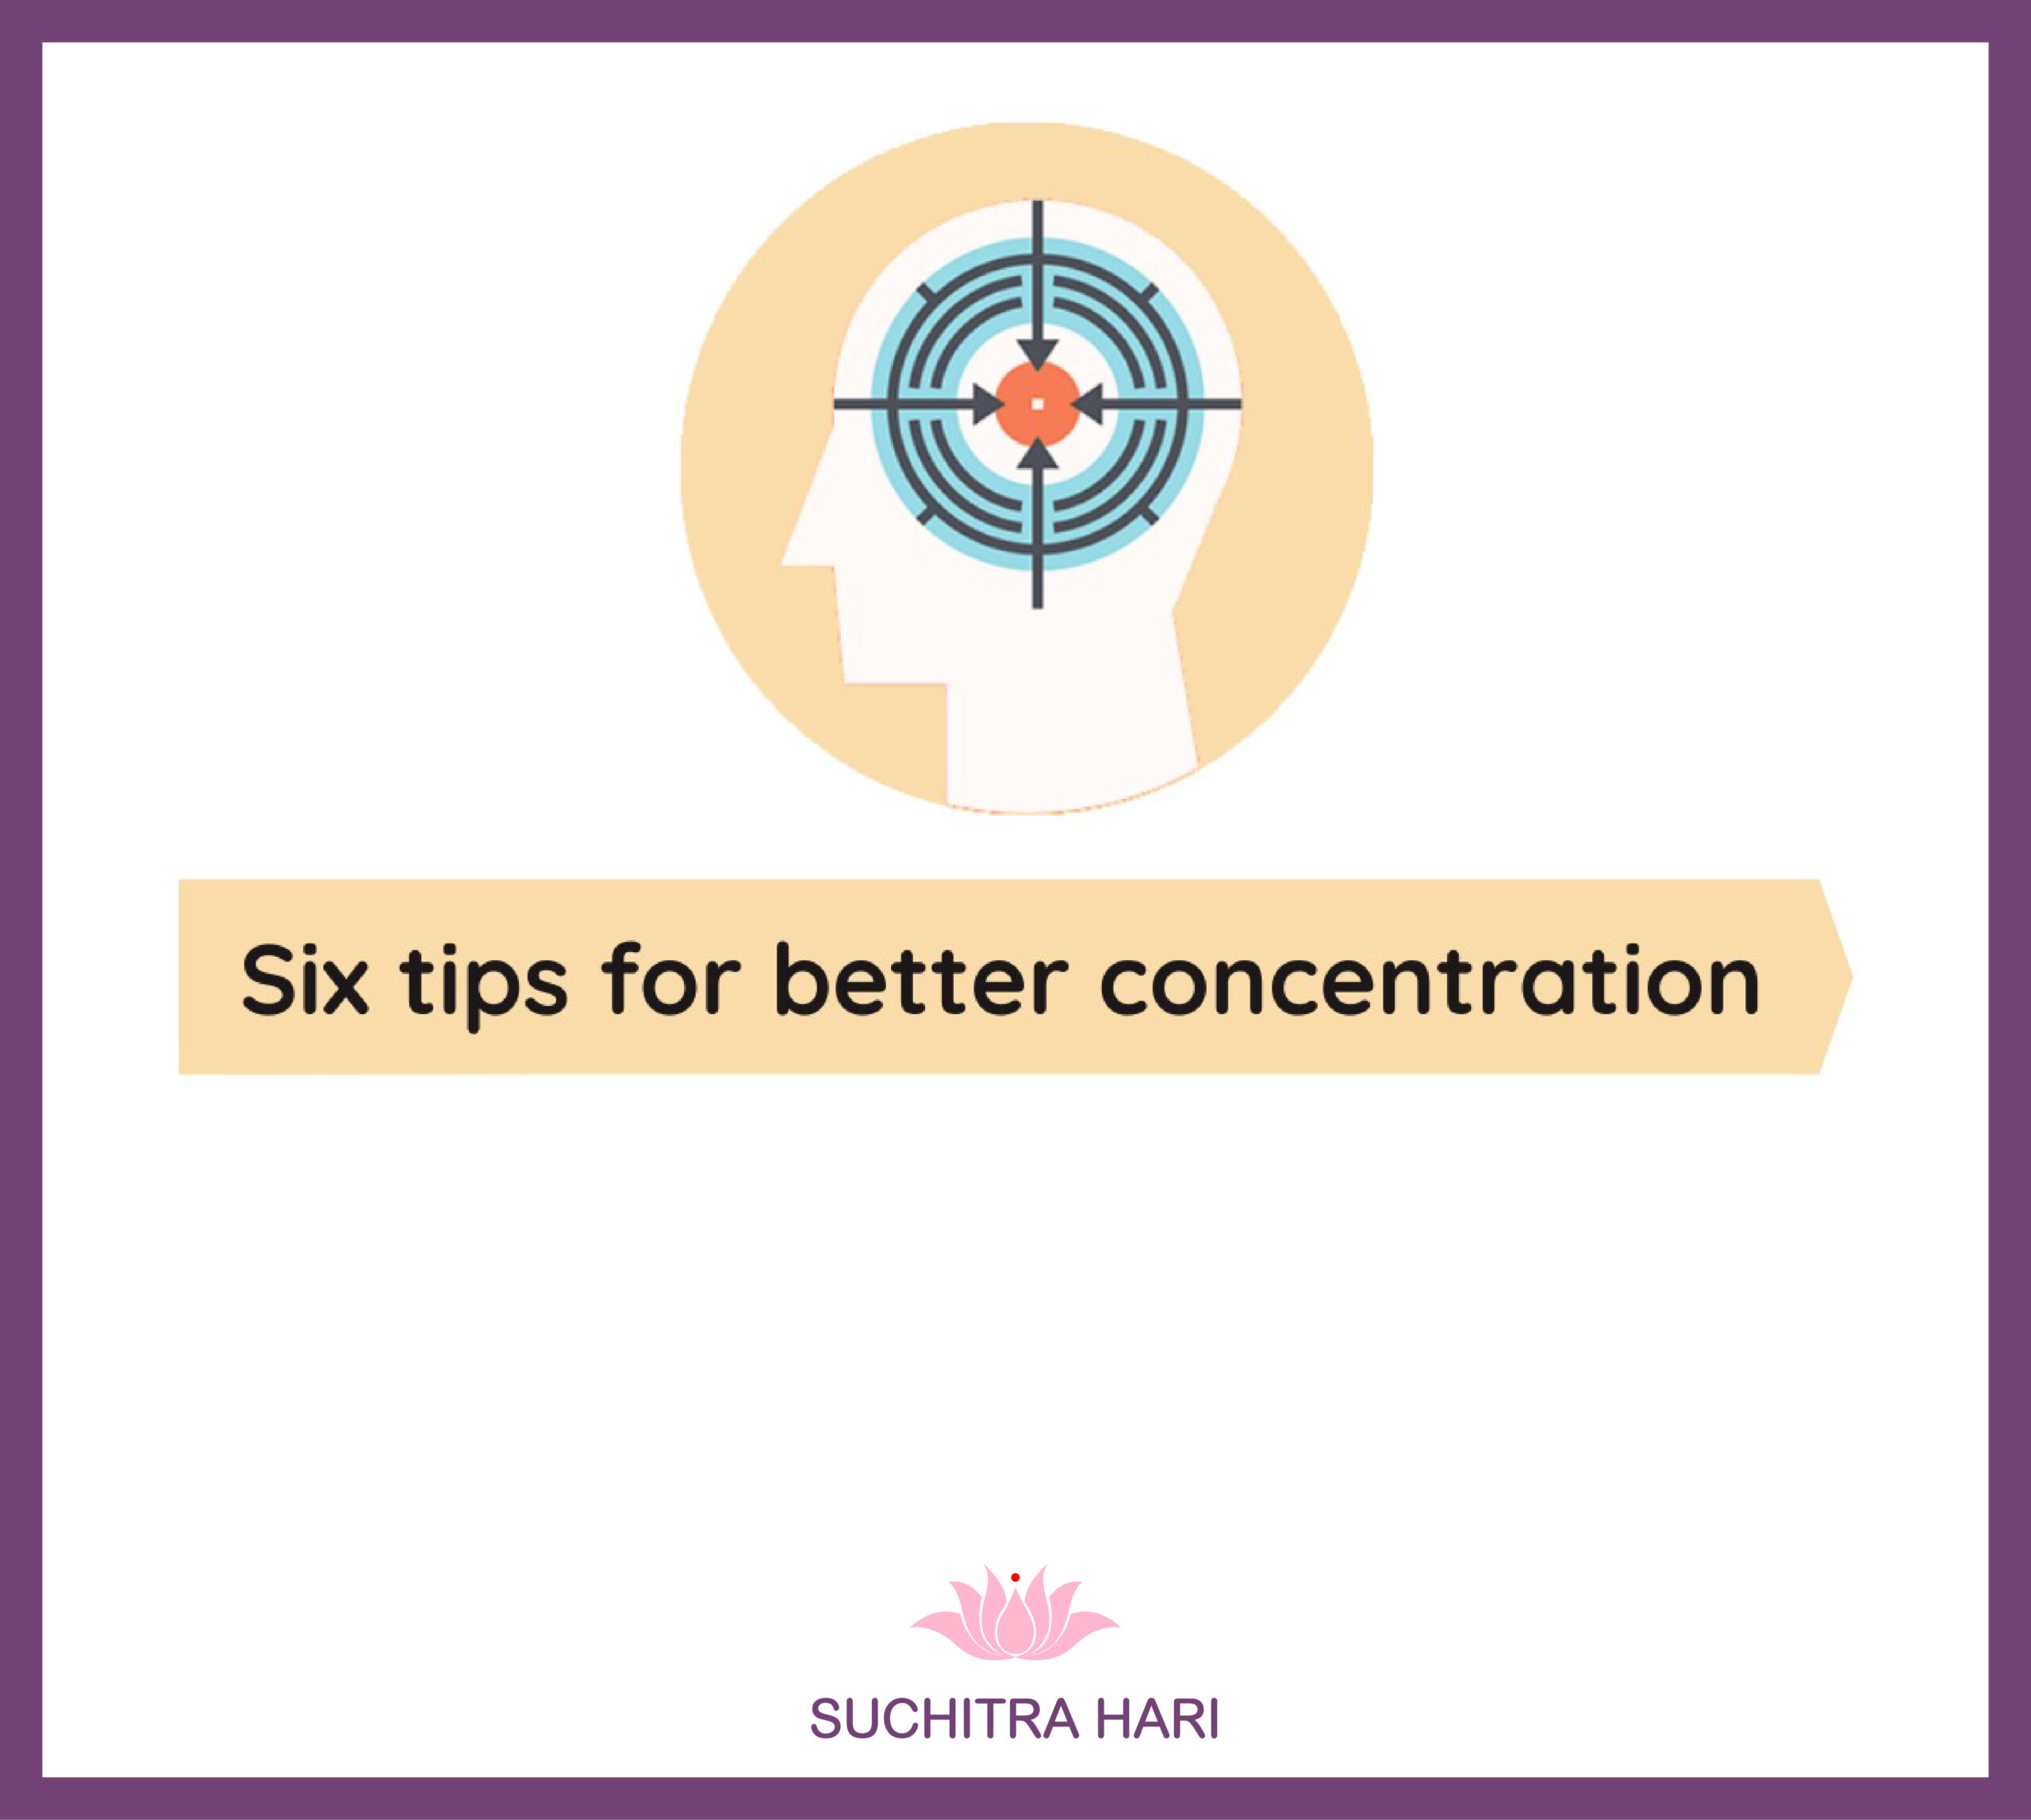 6 tips for better concentration